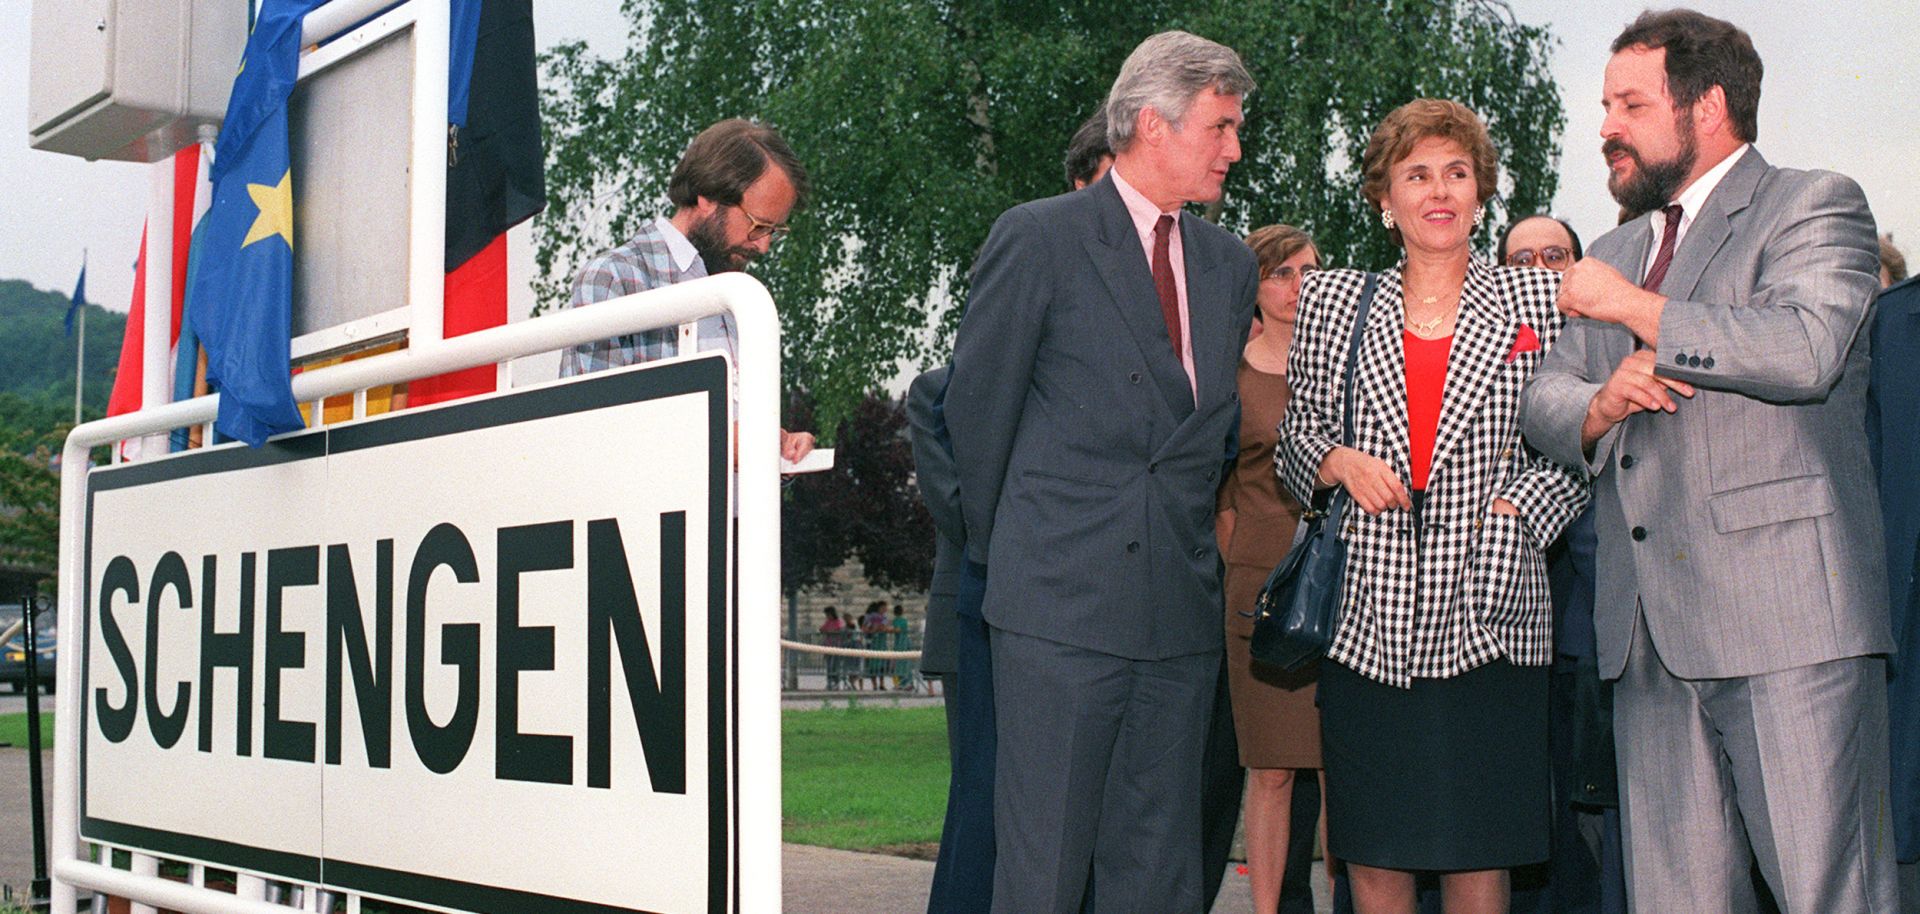  French minister for European affairs Edith Cresson (C) is flanked by Luxemburg's G. Wohlfahrt (D) and Belgium's Keersmaeker (L) in Schengen, 1990.